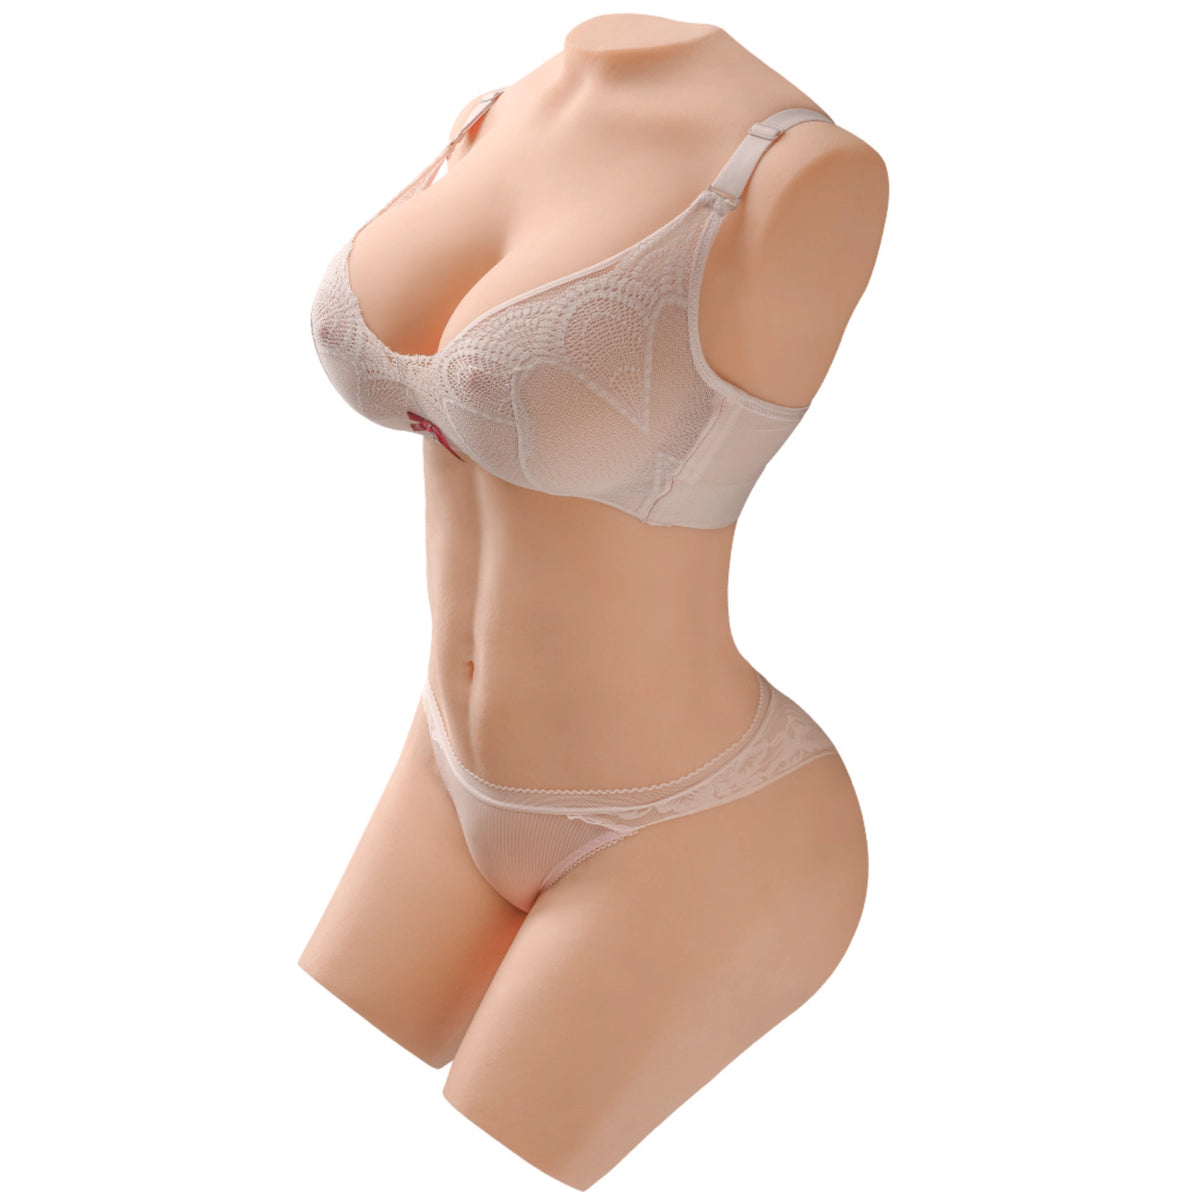 T505  Plus(89.28lb/70cm) Big Boobs and Juicy Ass Life Size Sex Torso With Slim Figure,Luxury Real Vagina & Anal Adult Love Doll Torso